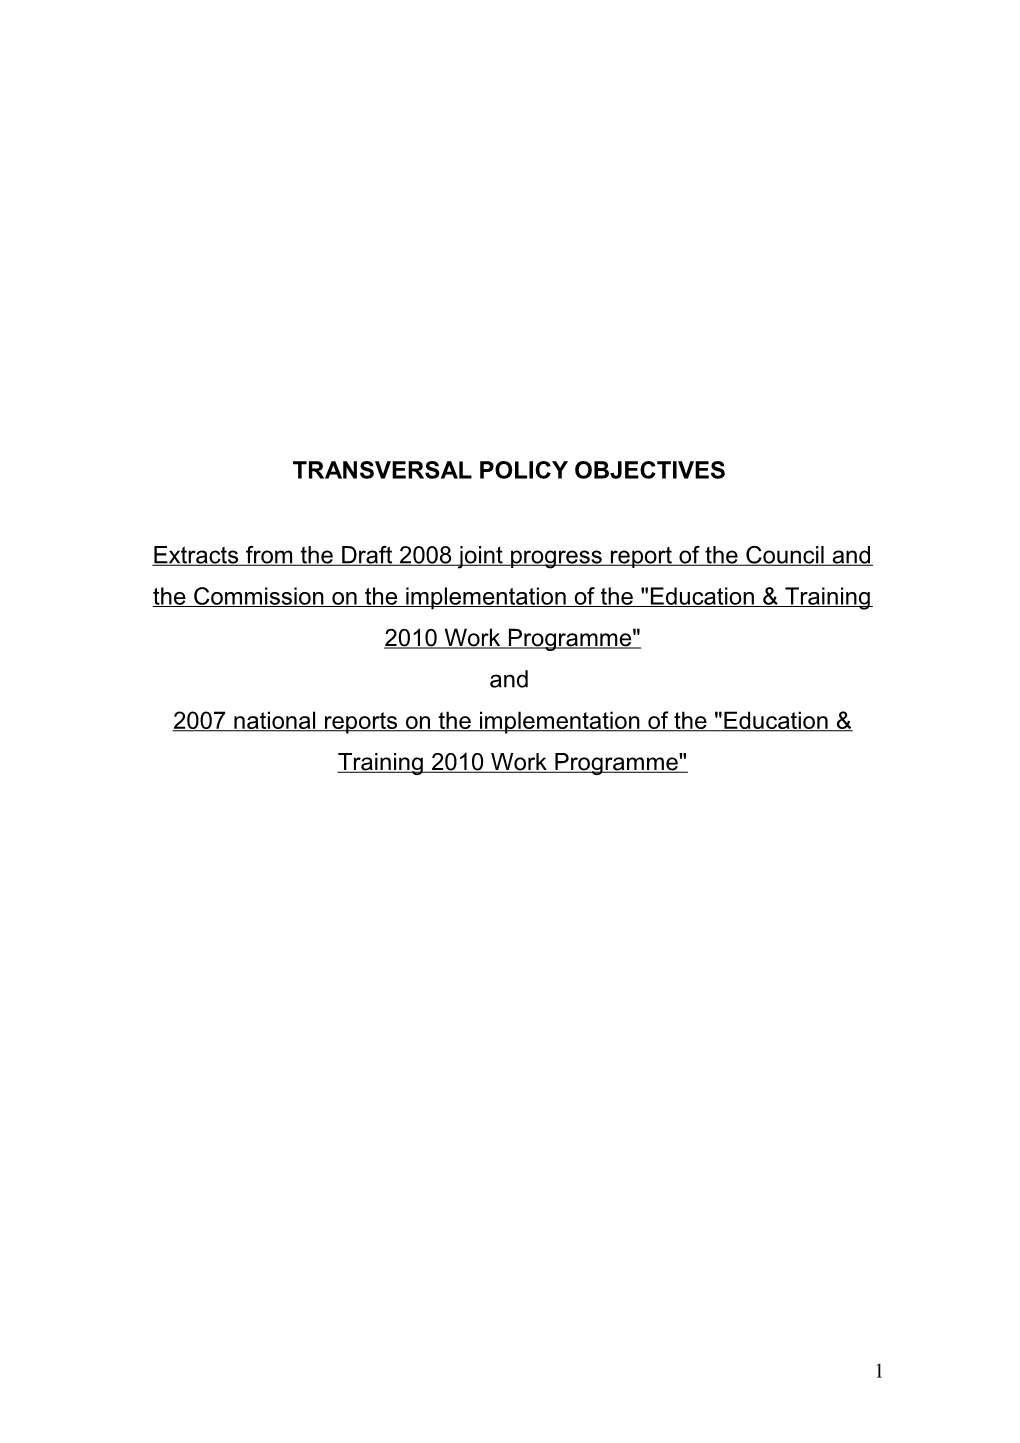 Transversal Policy Objectives